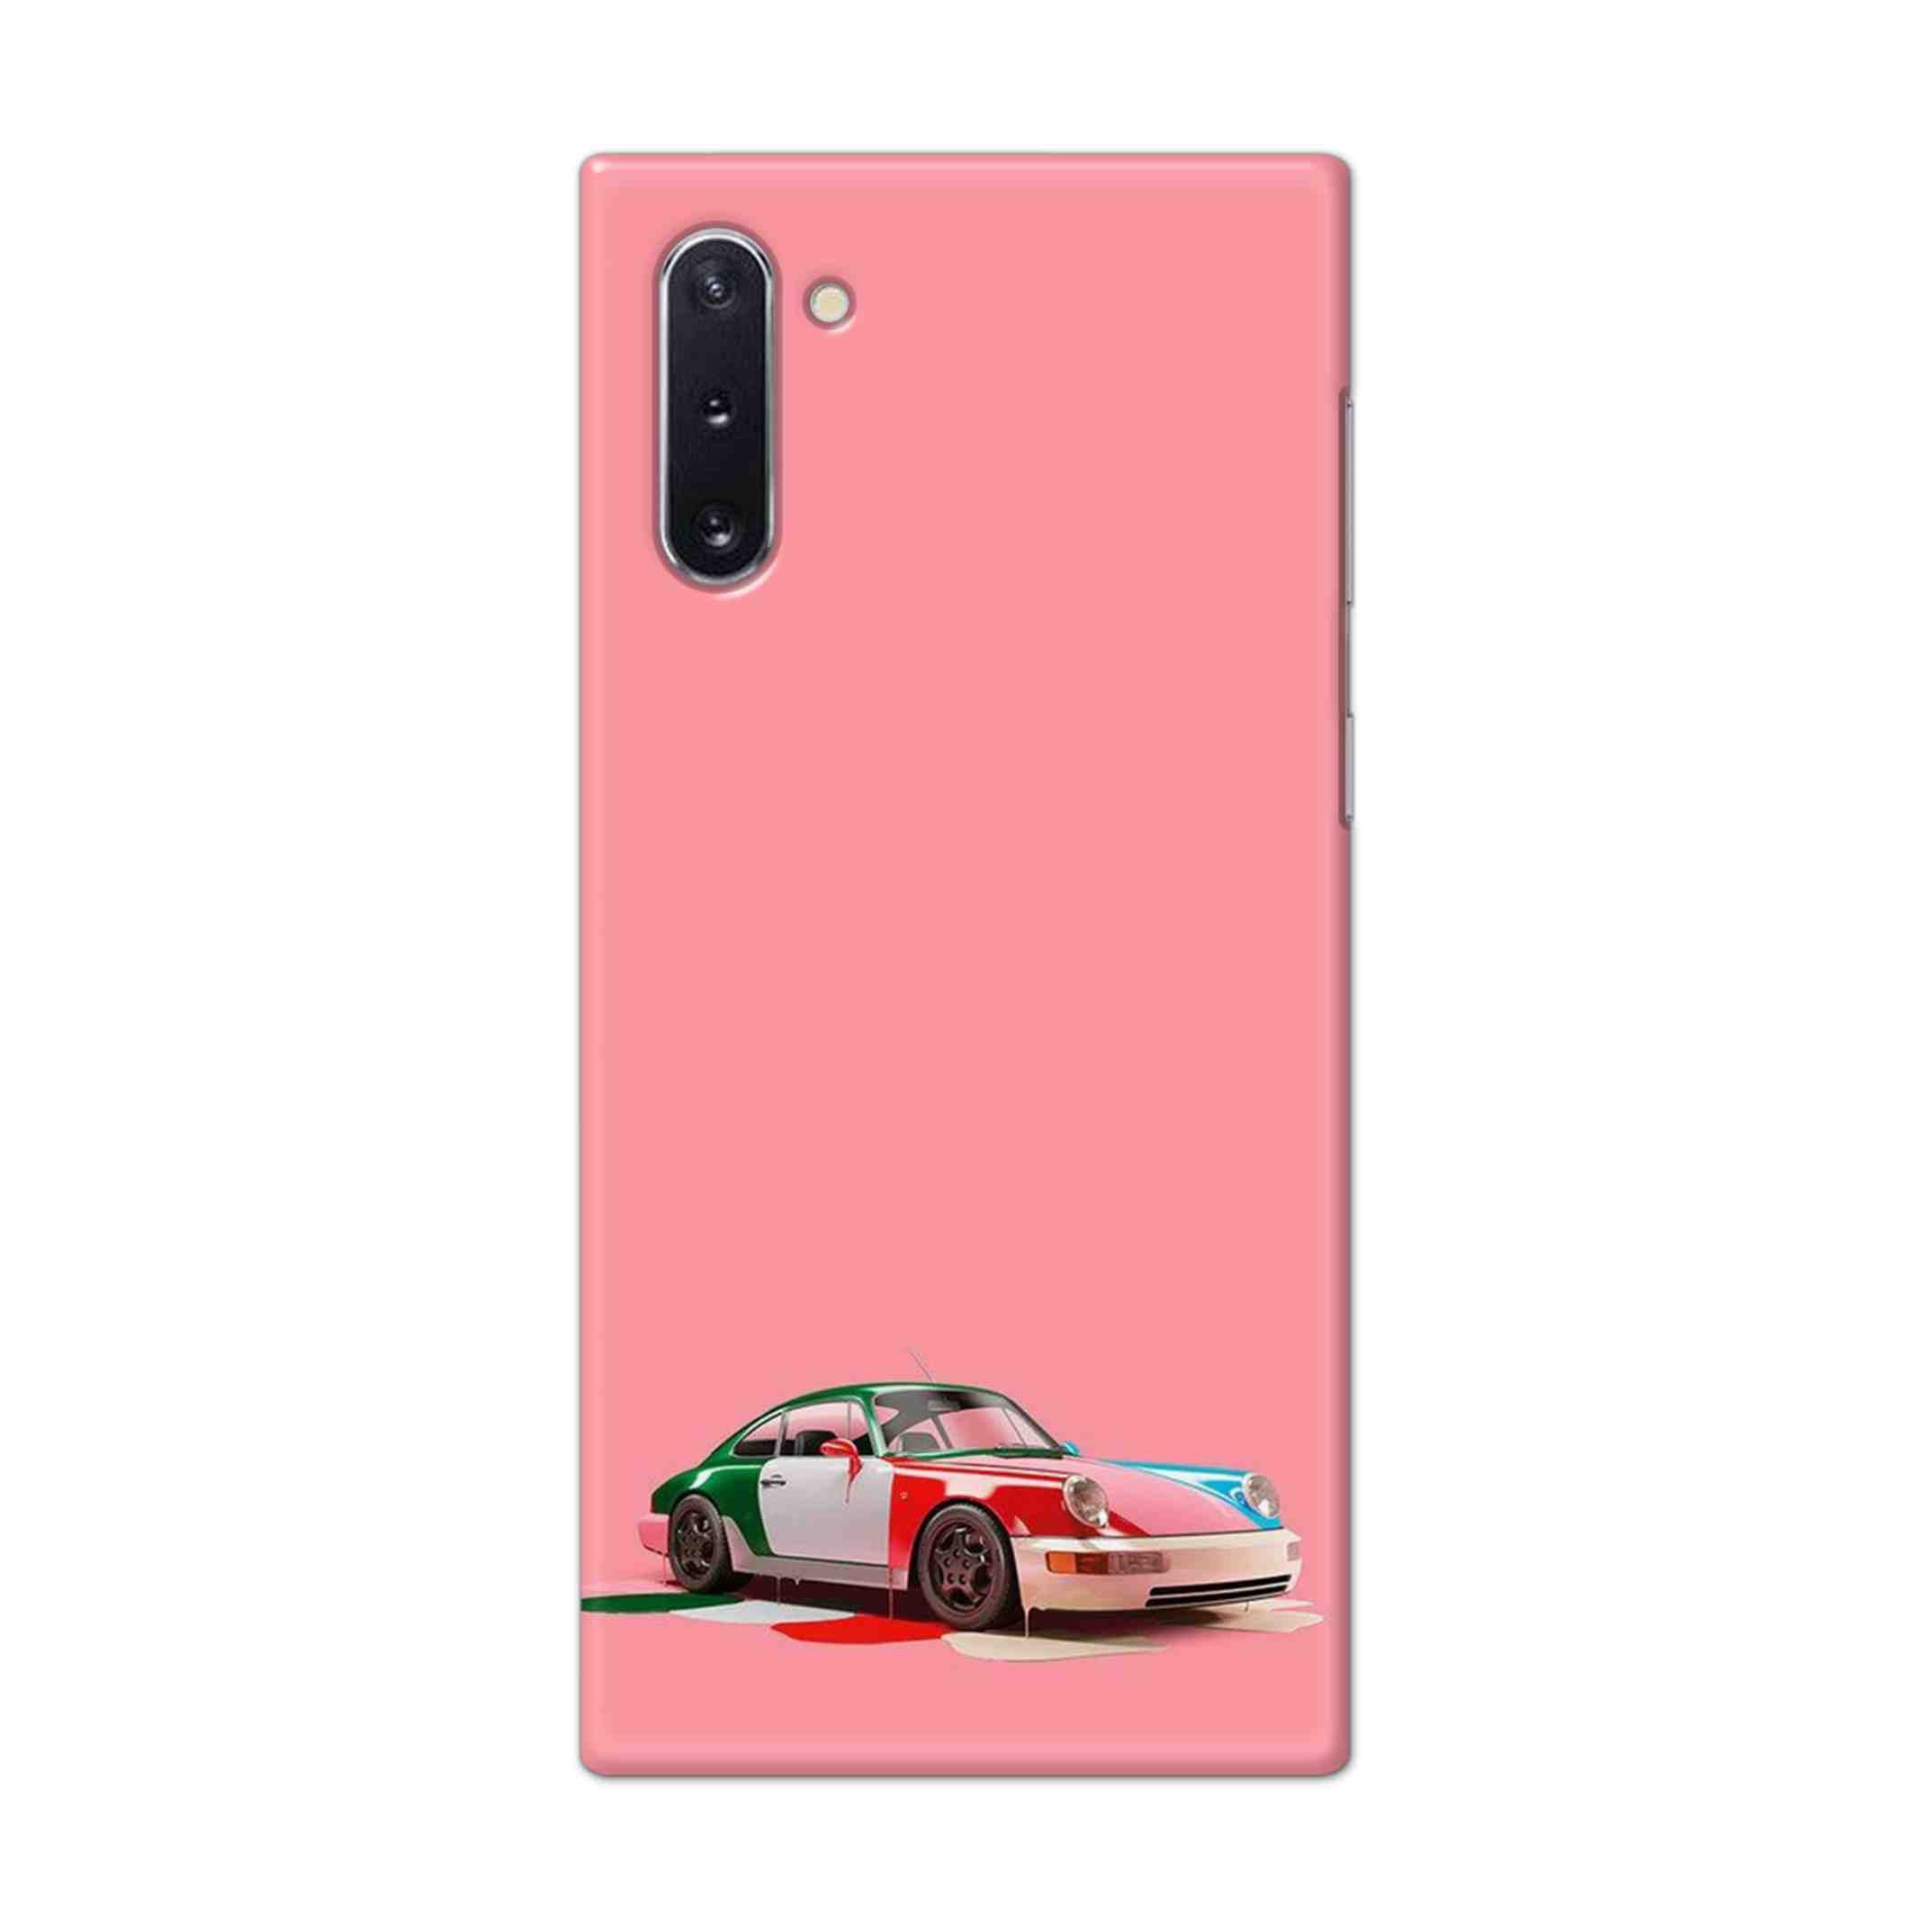 Buy Pink Porche Hard Back Mobile Phone Case Cover For Samsung Galaxy Note 10 Online